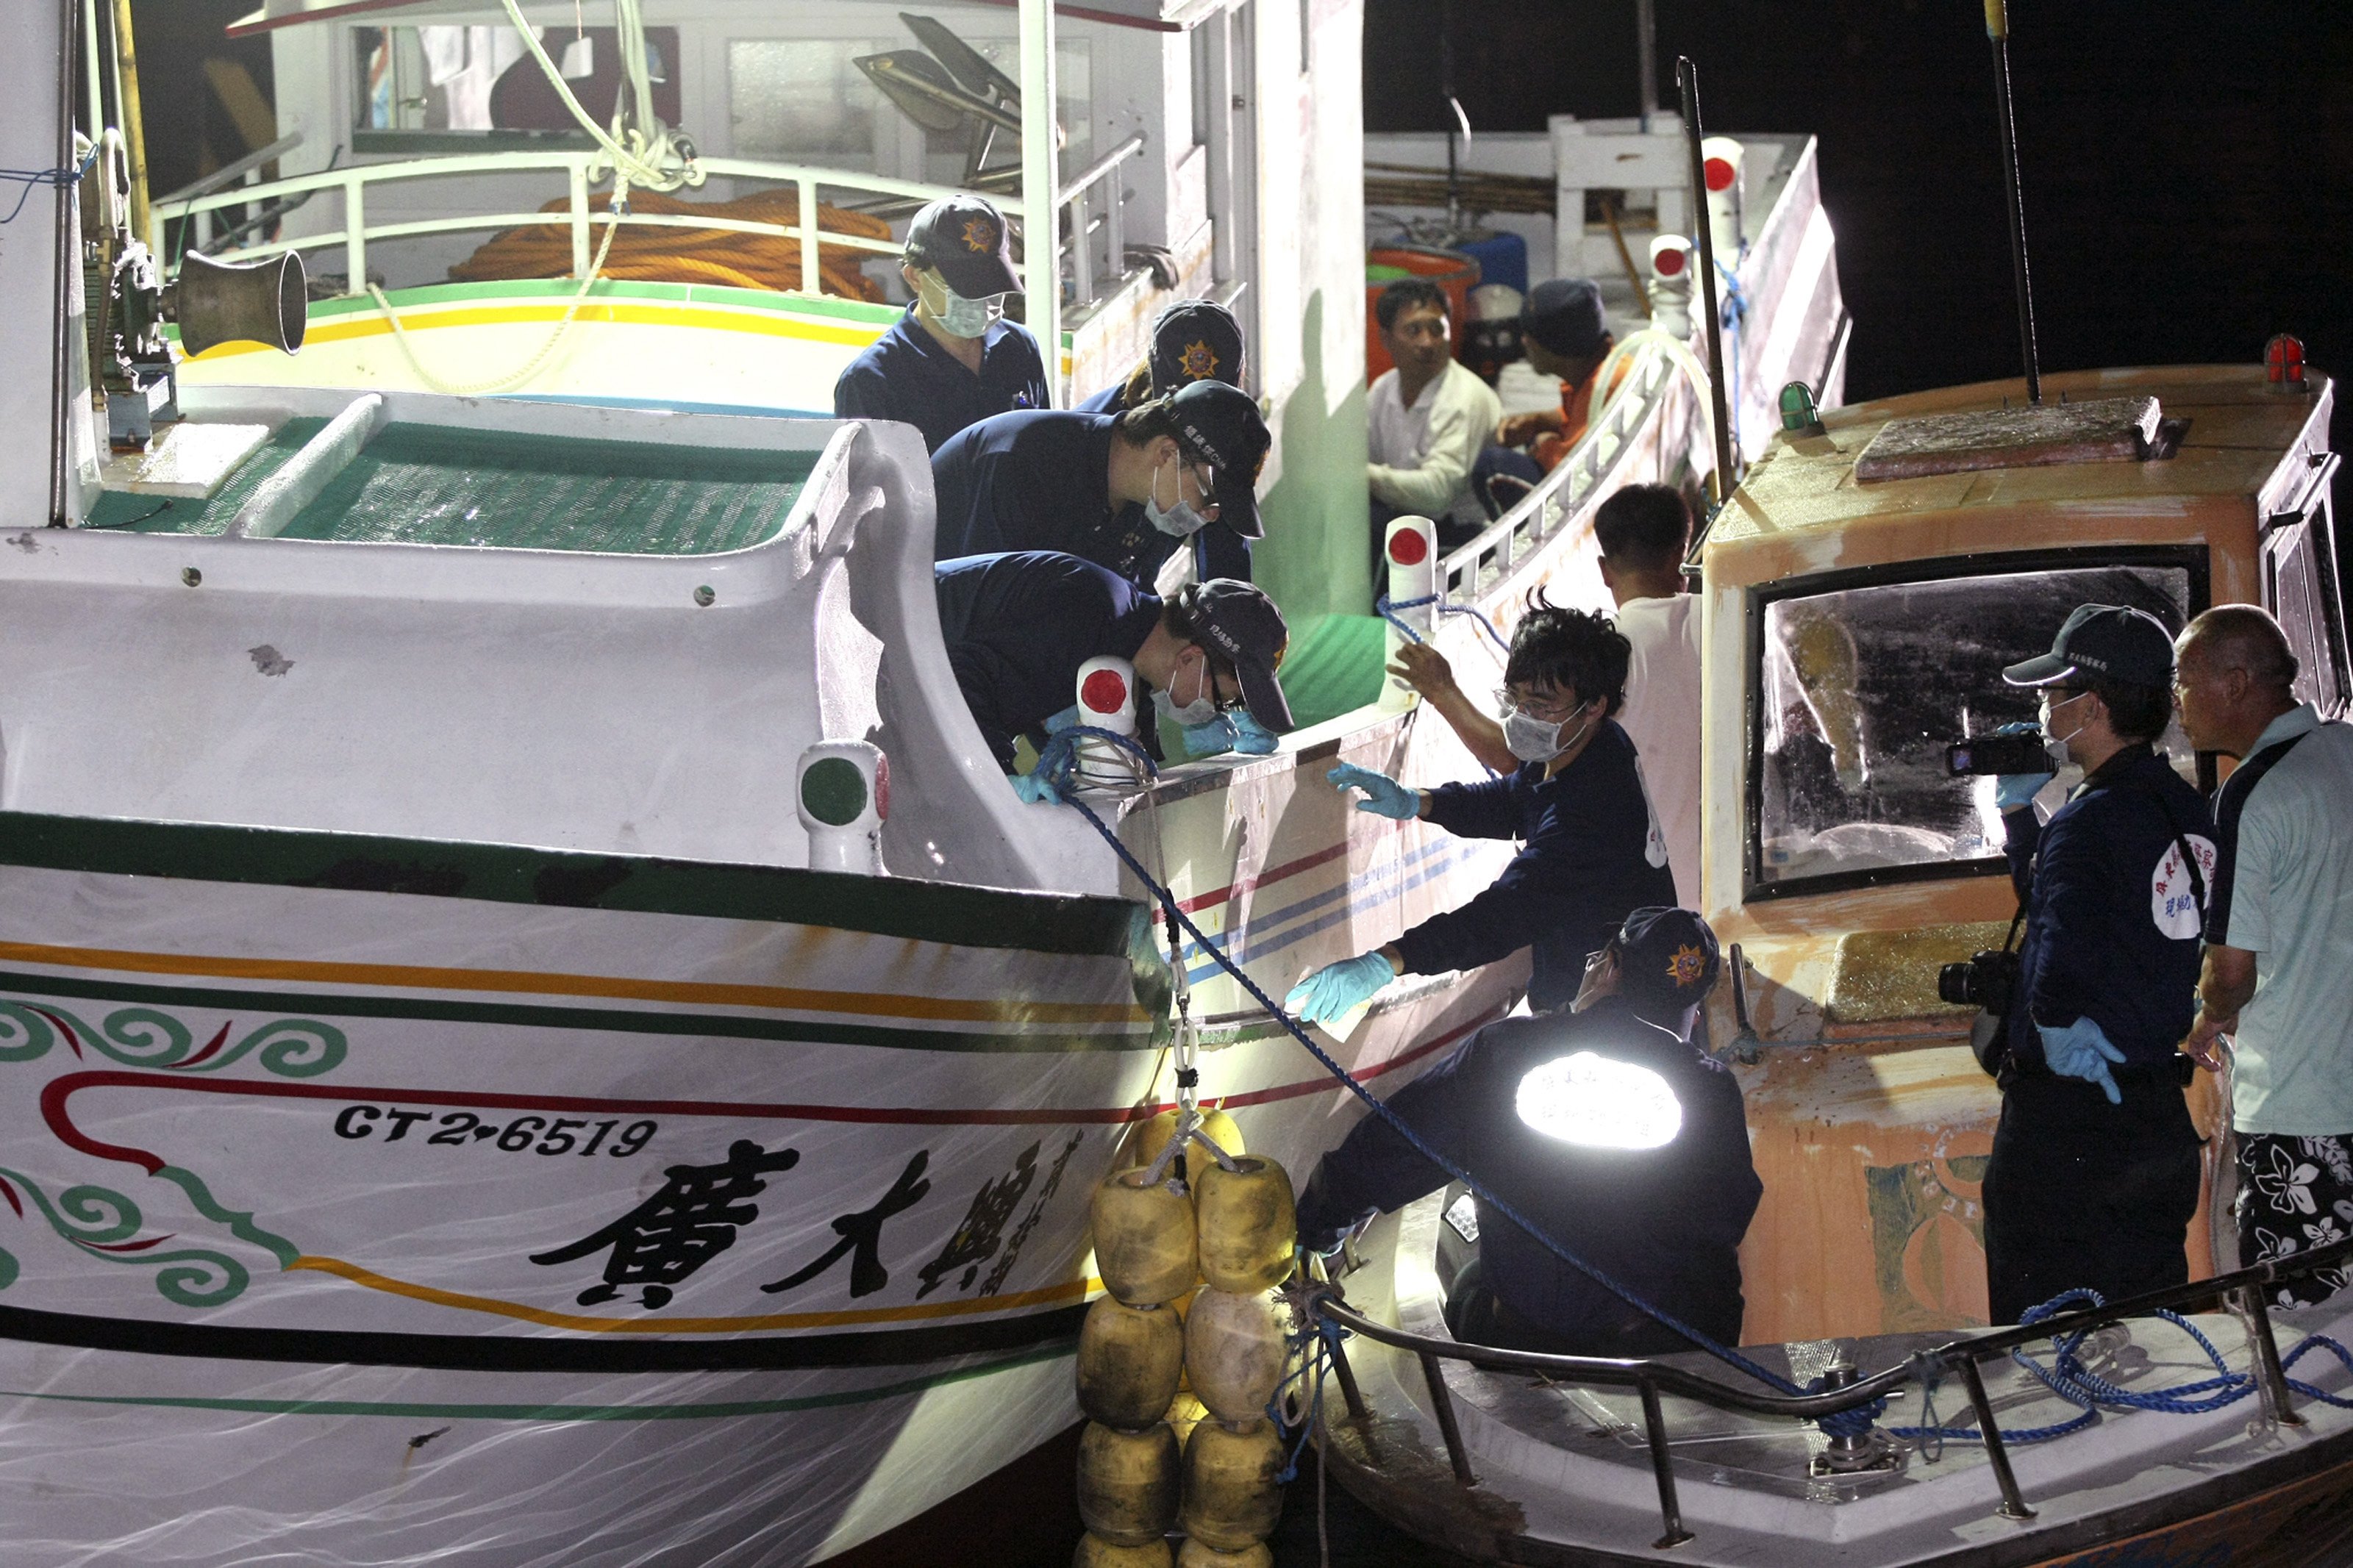 Taiwanese fisherman Hung Shih-cheng's boat, the Kuang Ta Hsing No 28, is inspected by Taiwanese officers after arriving at Liuqiu port in Pingtung County, Taiwan, on May 11. Photo: AP